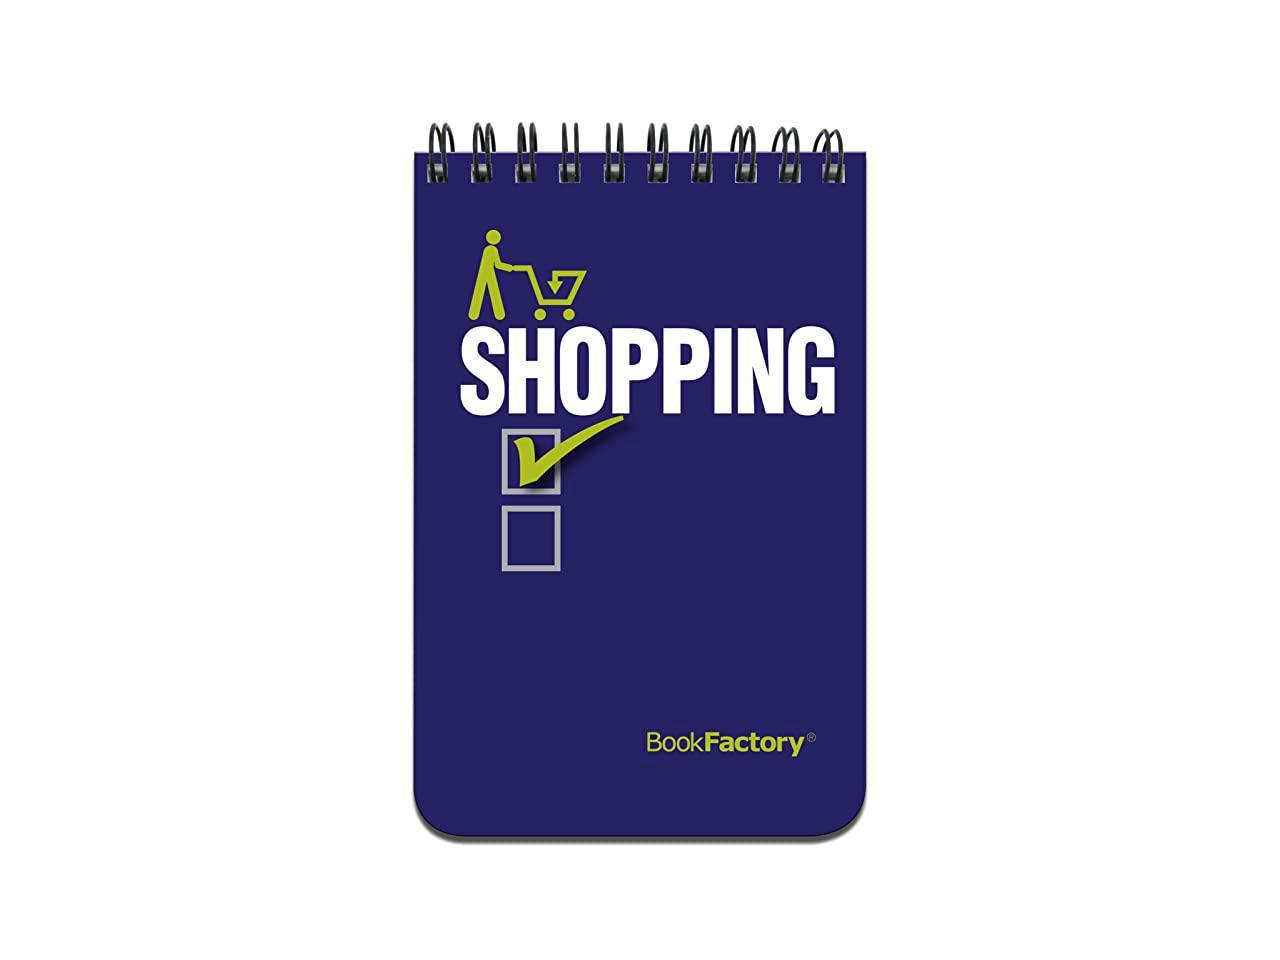 BookFactory Shopping List Notebook/Grocery Shopping/Pocket Mini Shopper's Notebooks 120 Pages Shopping 3 1/2” x 5 1/4 Durable Translucent Cover Wire-O Binding Top Bound JOU-120-M3CWT-A 